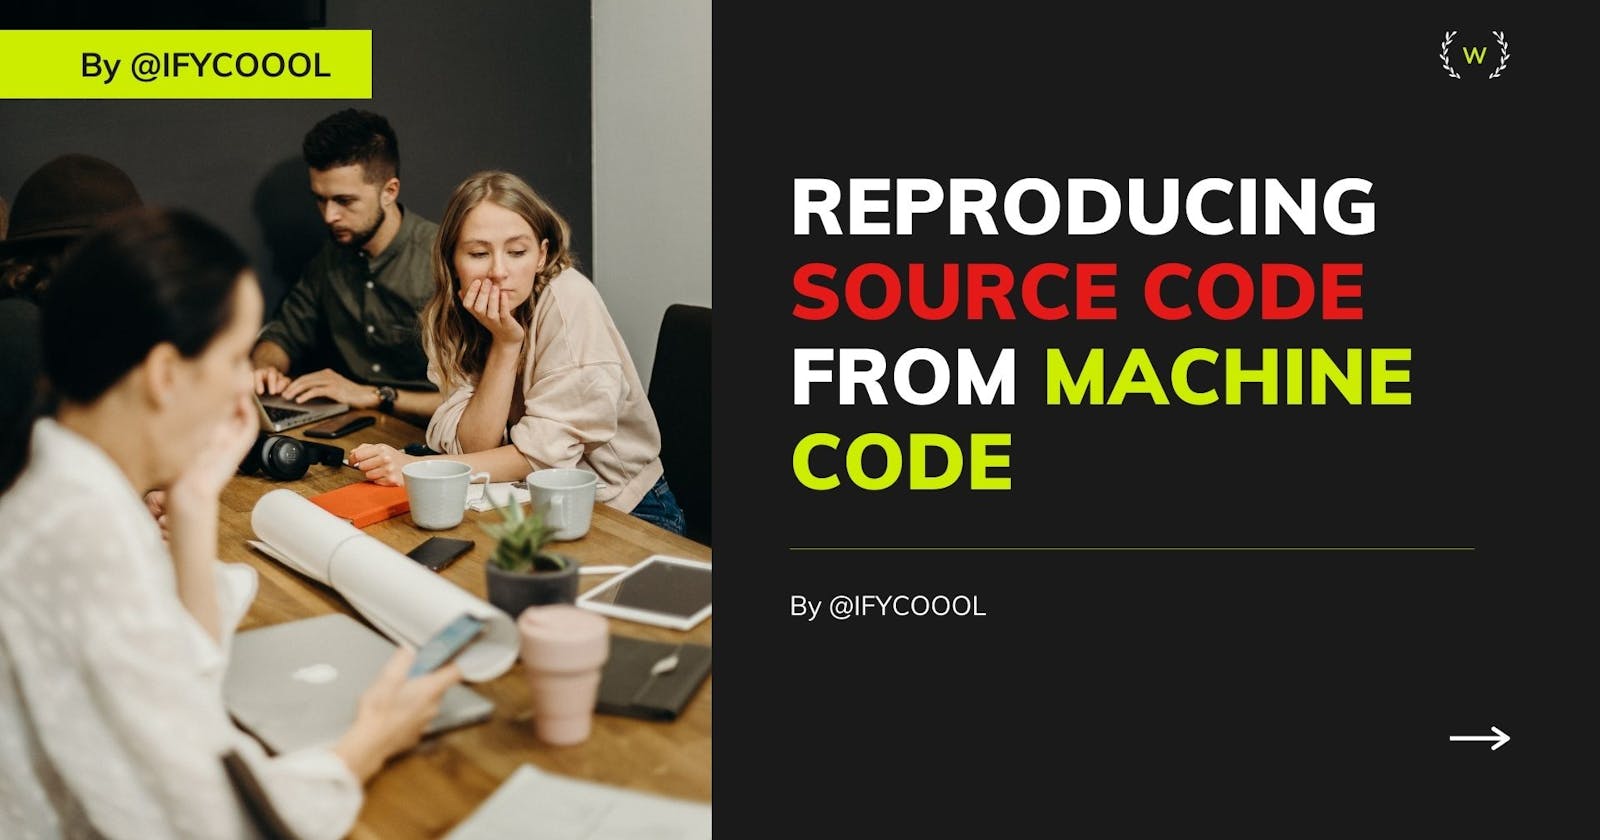 Can the Source codes be reproduced from Machine codes, if lost?